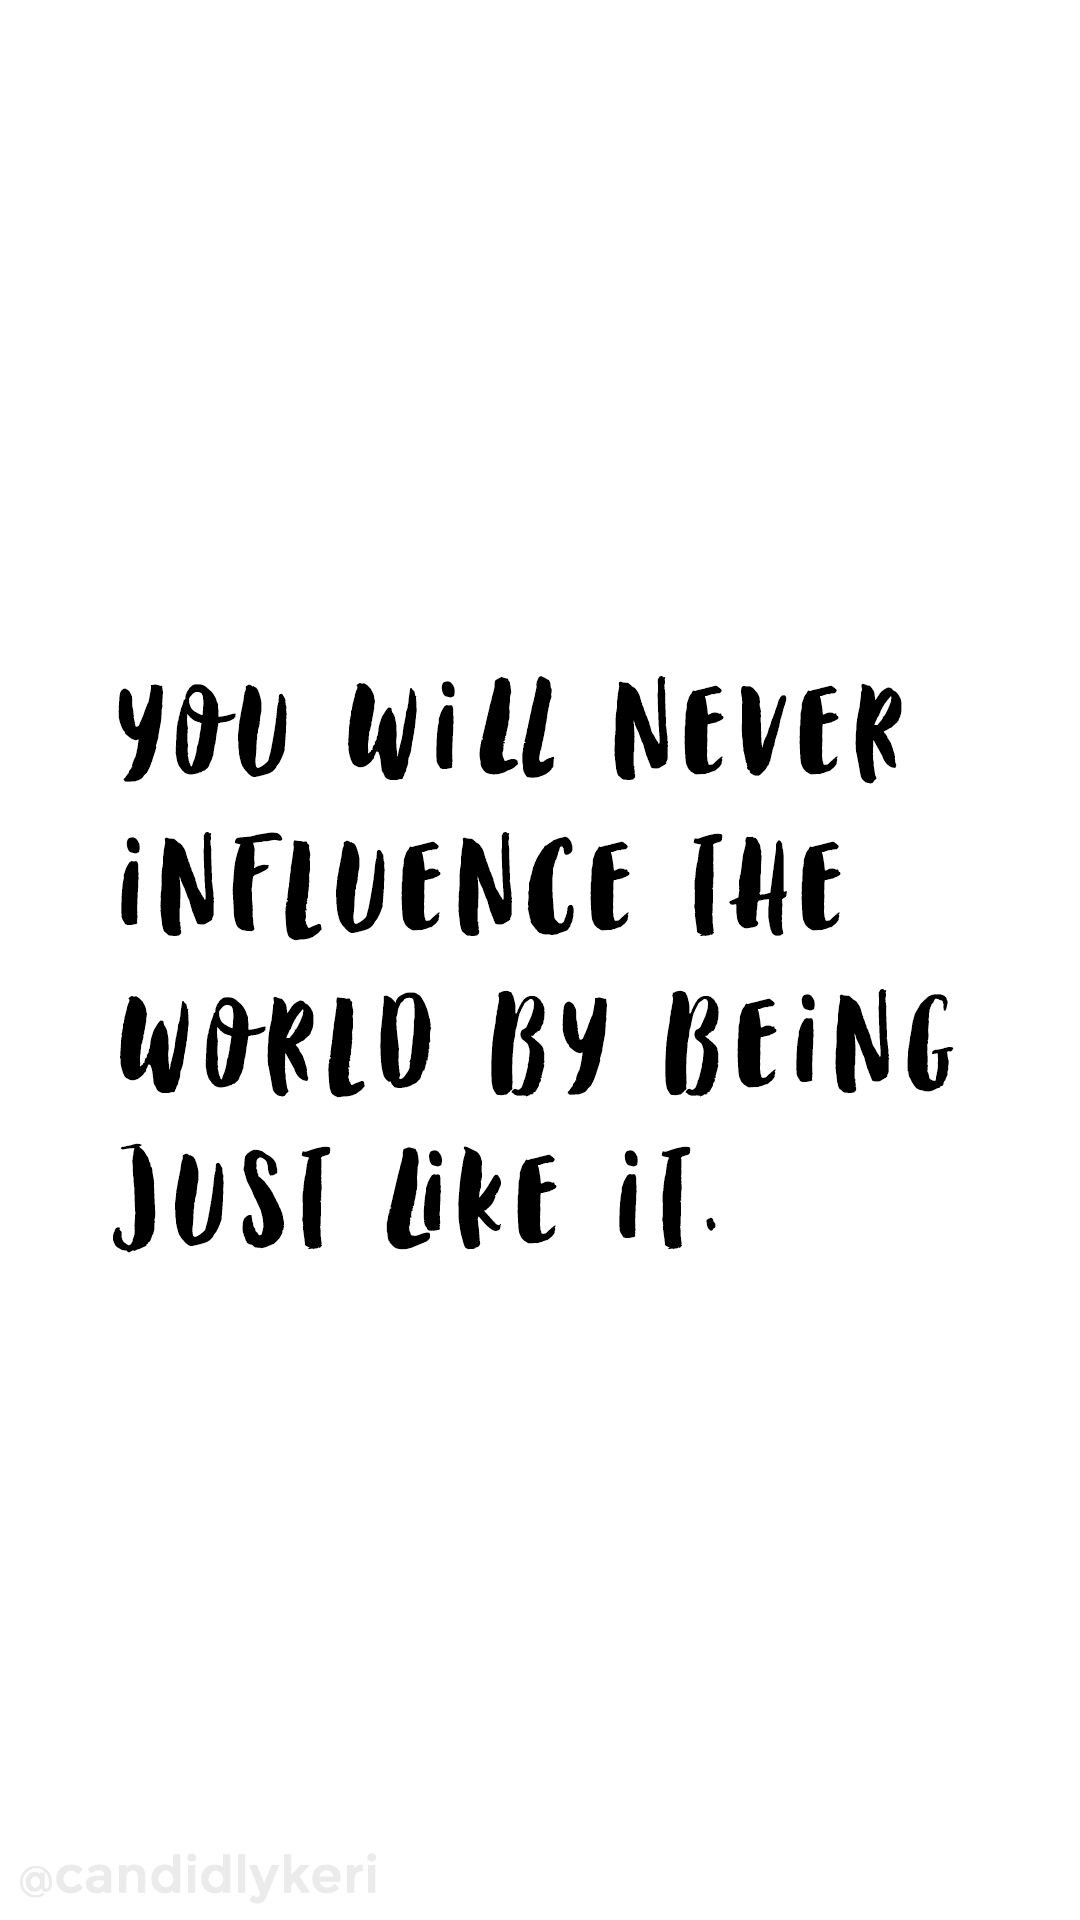 Inspirational Quotes White Background
 "You will never influence the world by being just like it